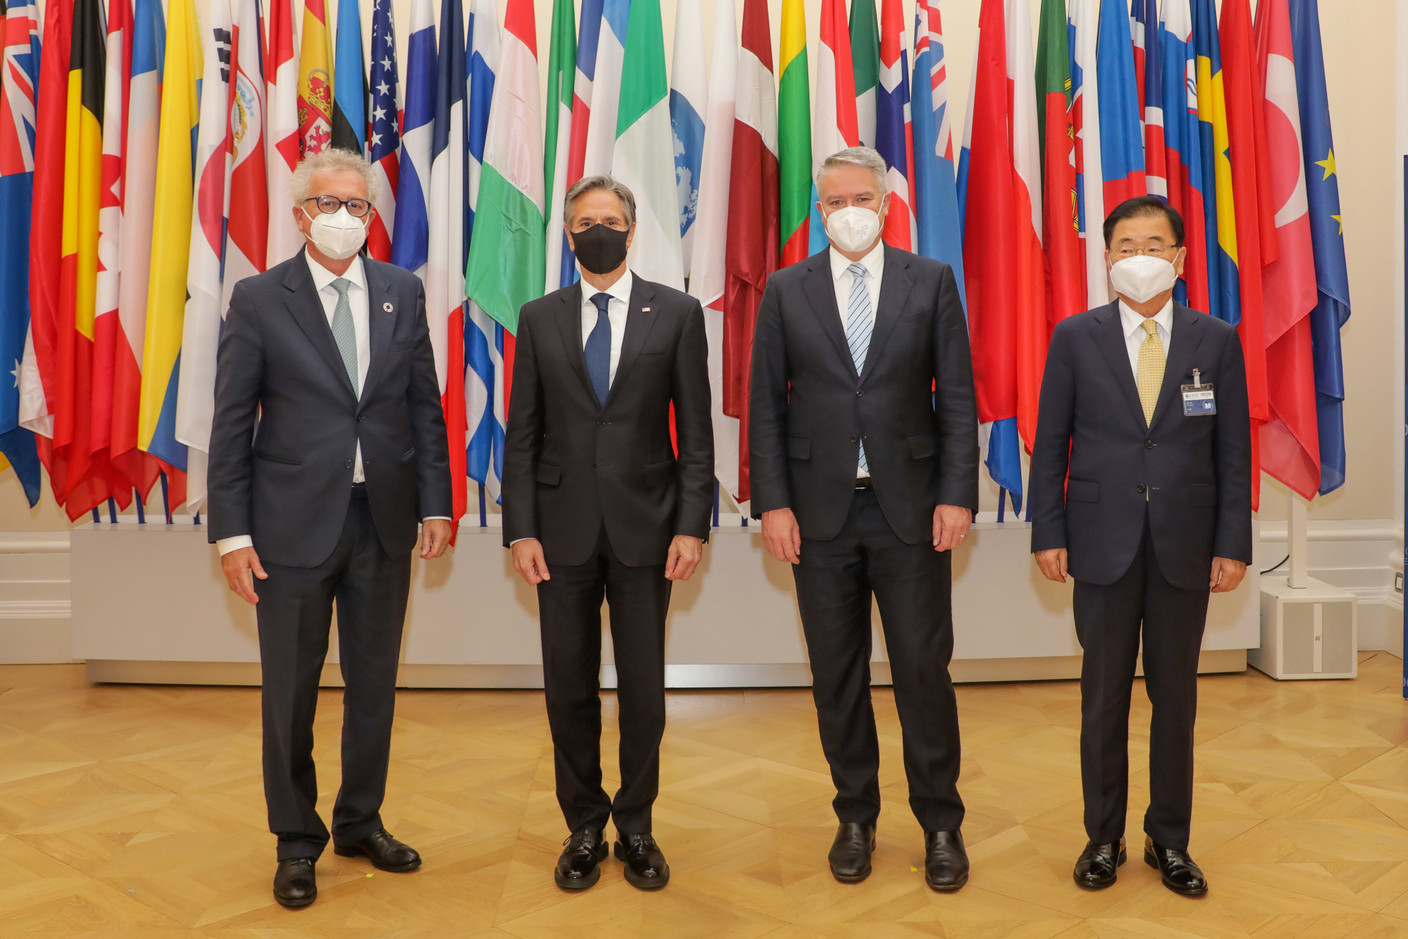 (L-R) Pierre Gramegna, Minister of Finance; Antony Blinken, Secretary of State of the United States of America and Chair of the Ministerial Council Meeting; Mathias Cormann, Secretary General of the Organisation for Economic Co-operation and Development (OECD); Chung Eui-yong, Deputy Prime Minister of the Republic of Korea SIP/LUC DEFLORENNE